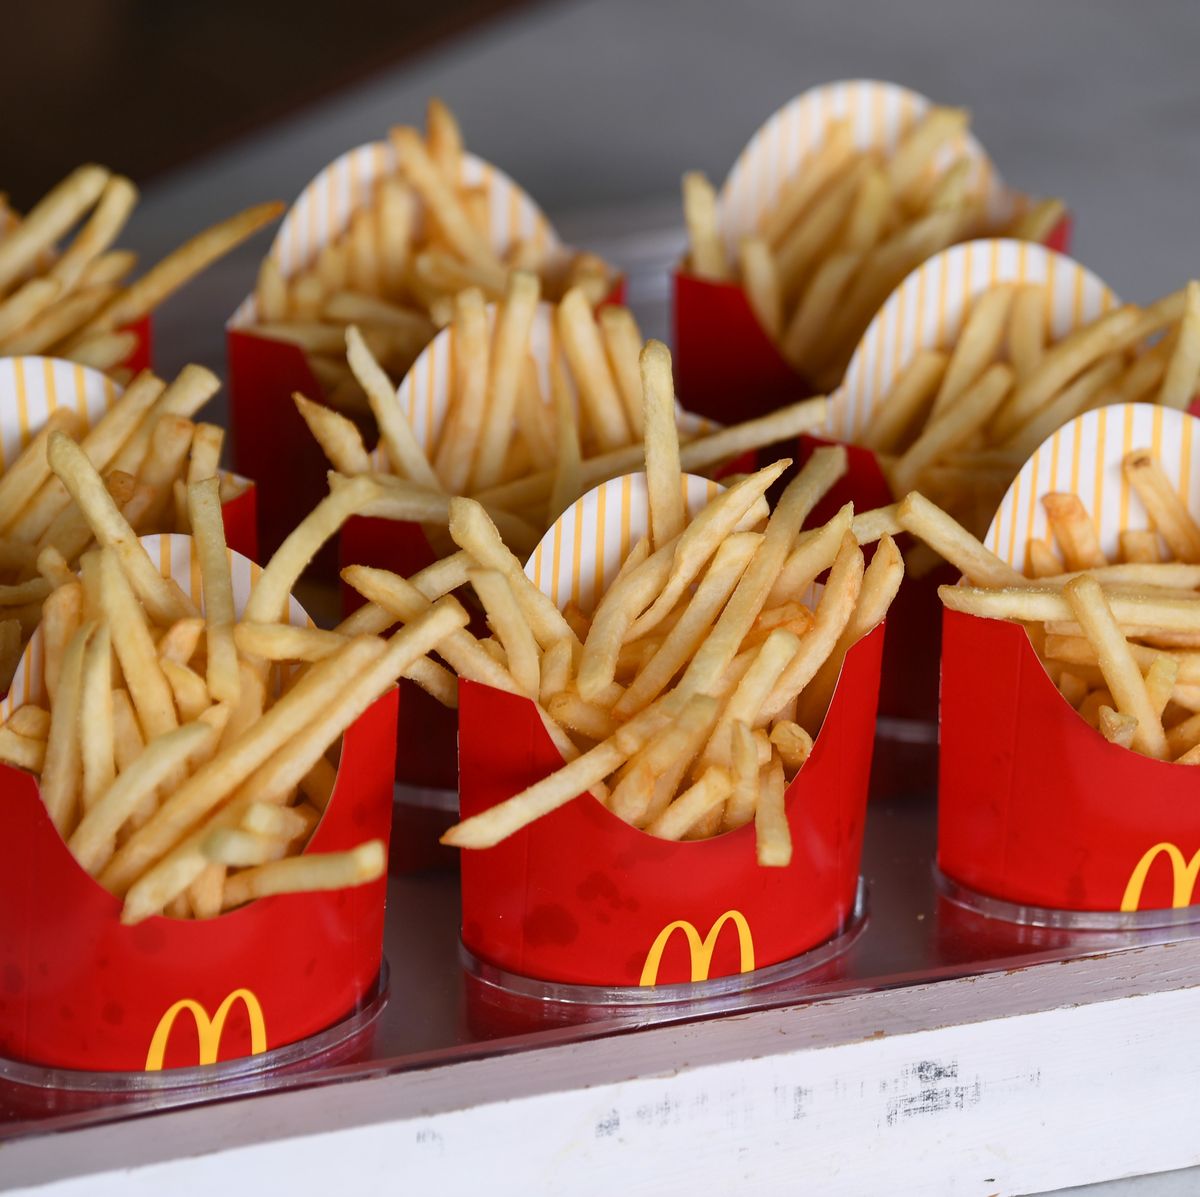 8 Things You Need To Know Before You Eat McDonald's Fries